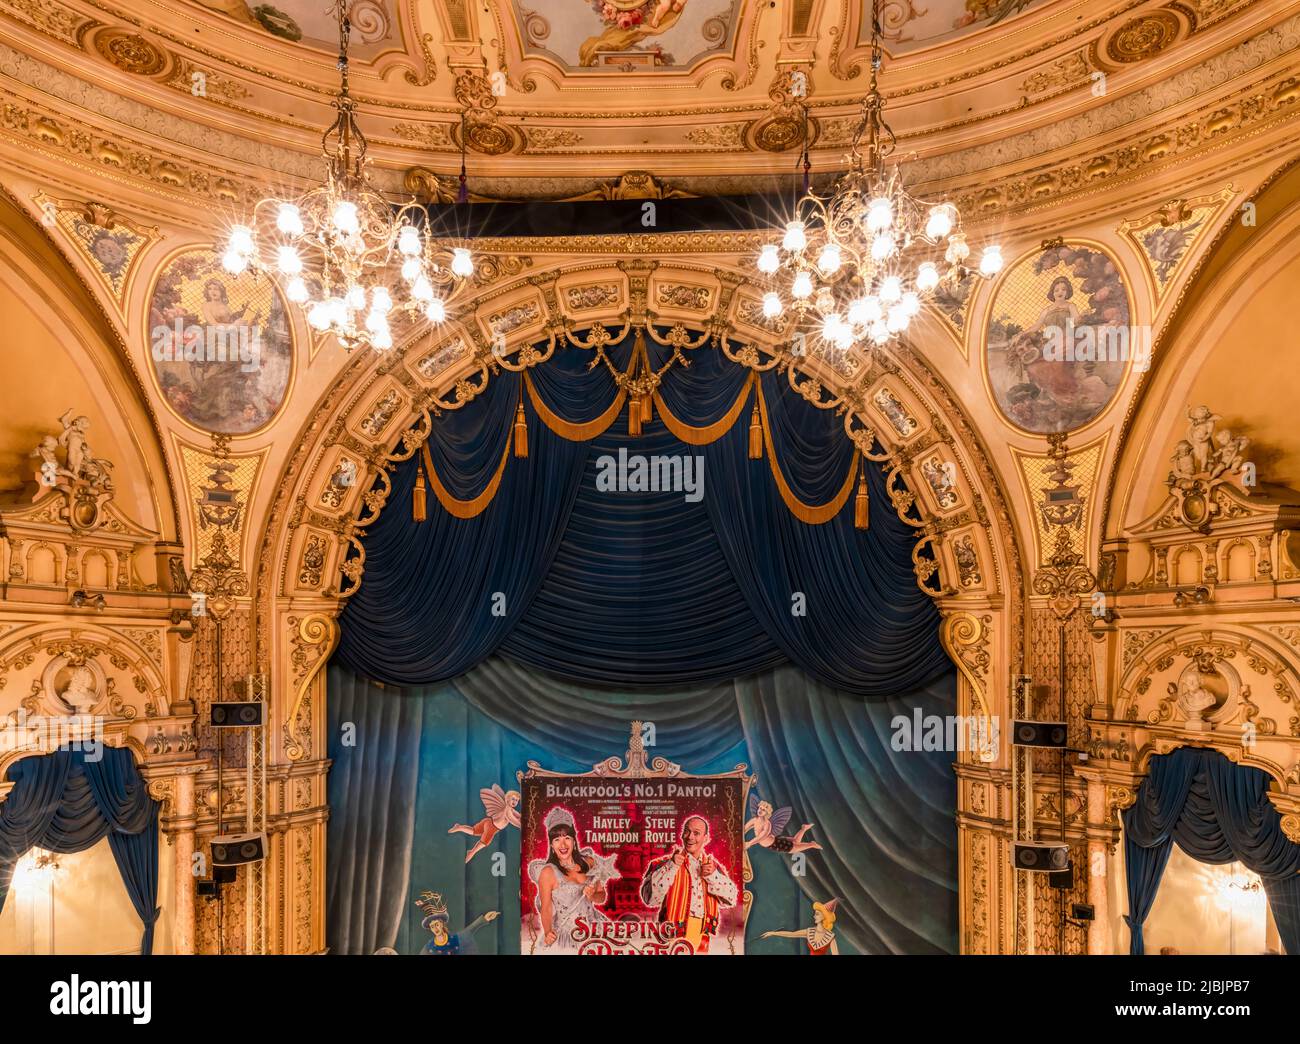 A view of the blue front tabs, stage area and ornate architecture of the Frank Matcham designed, Grand Theatre in Blackpool, Lancashire, UK. Stock Photo